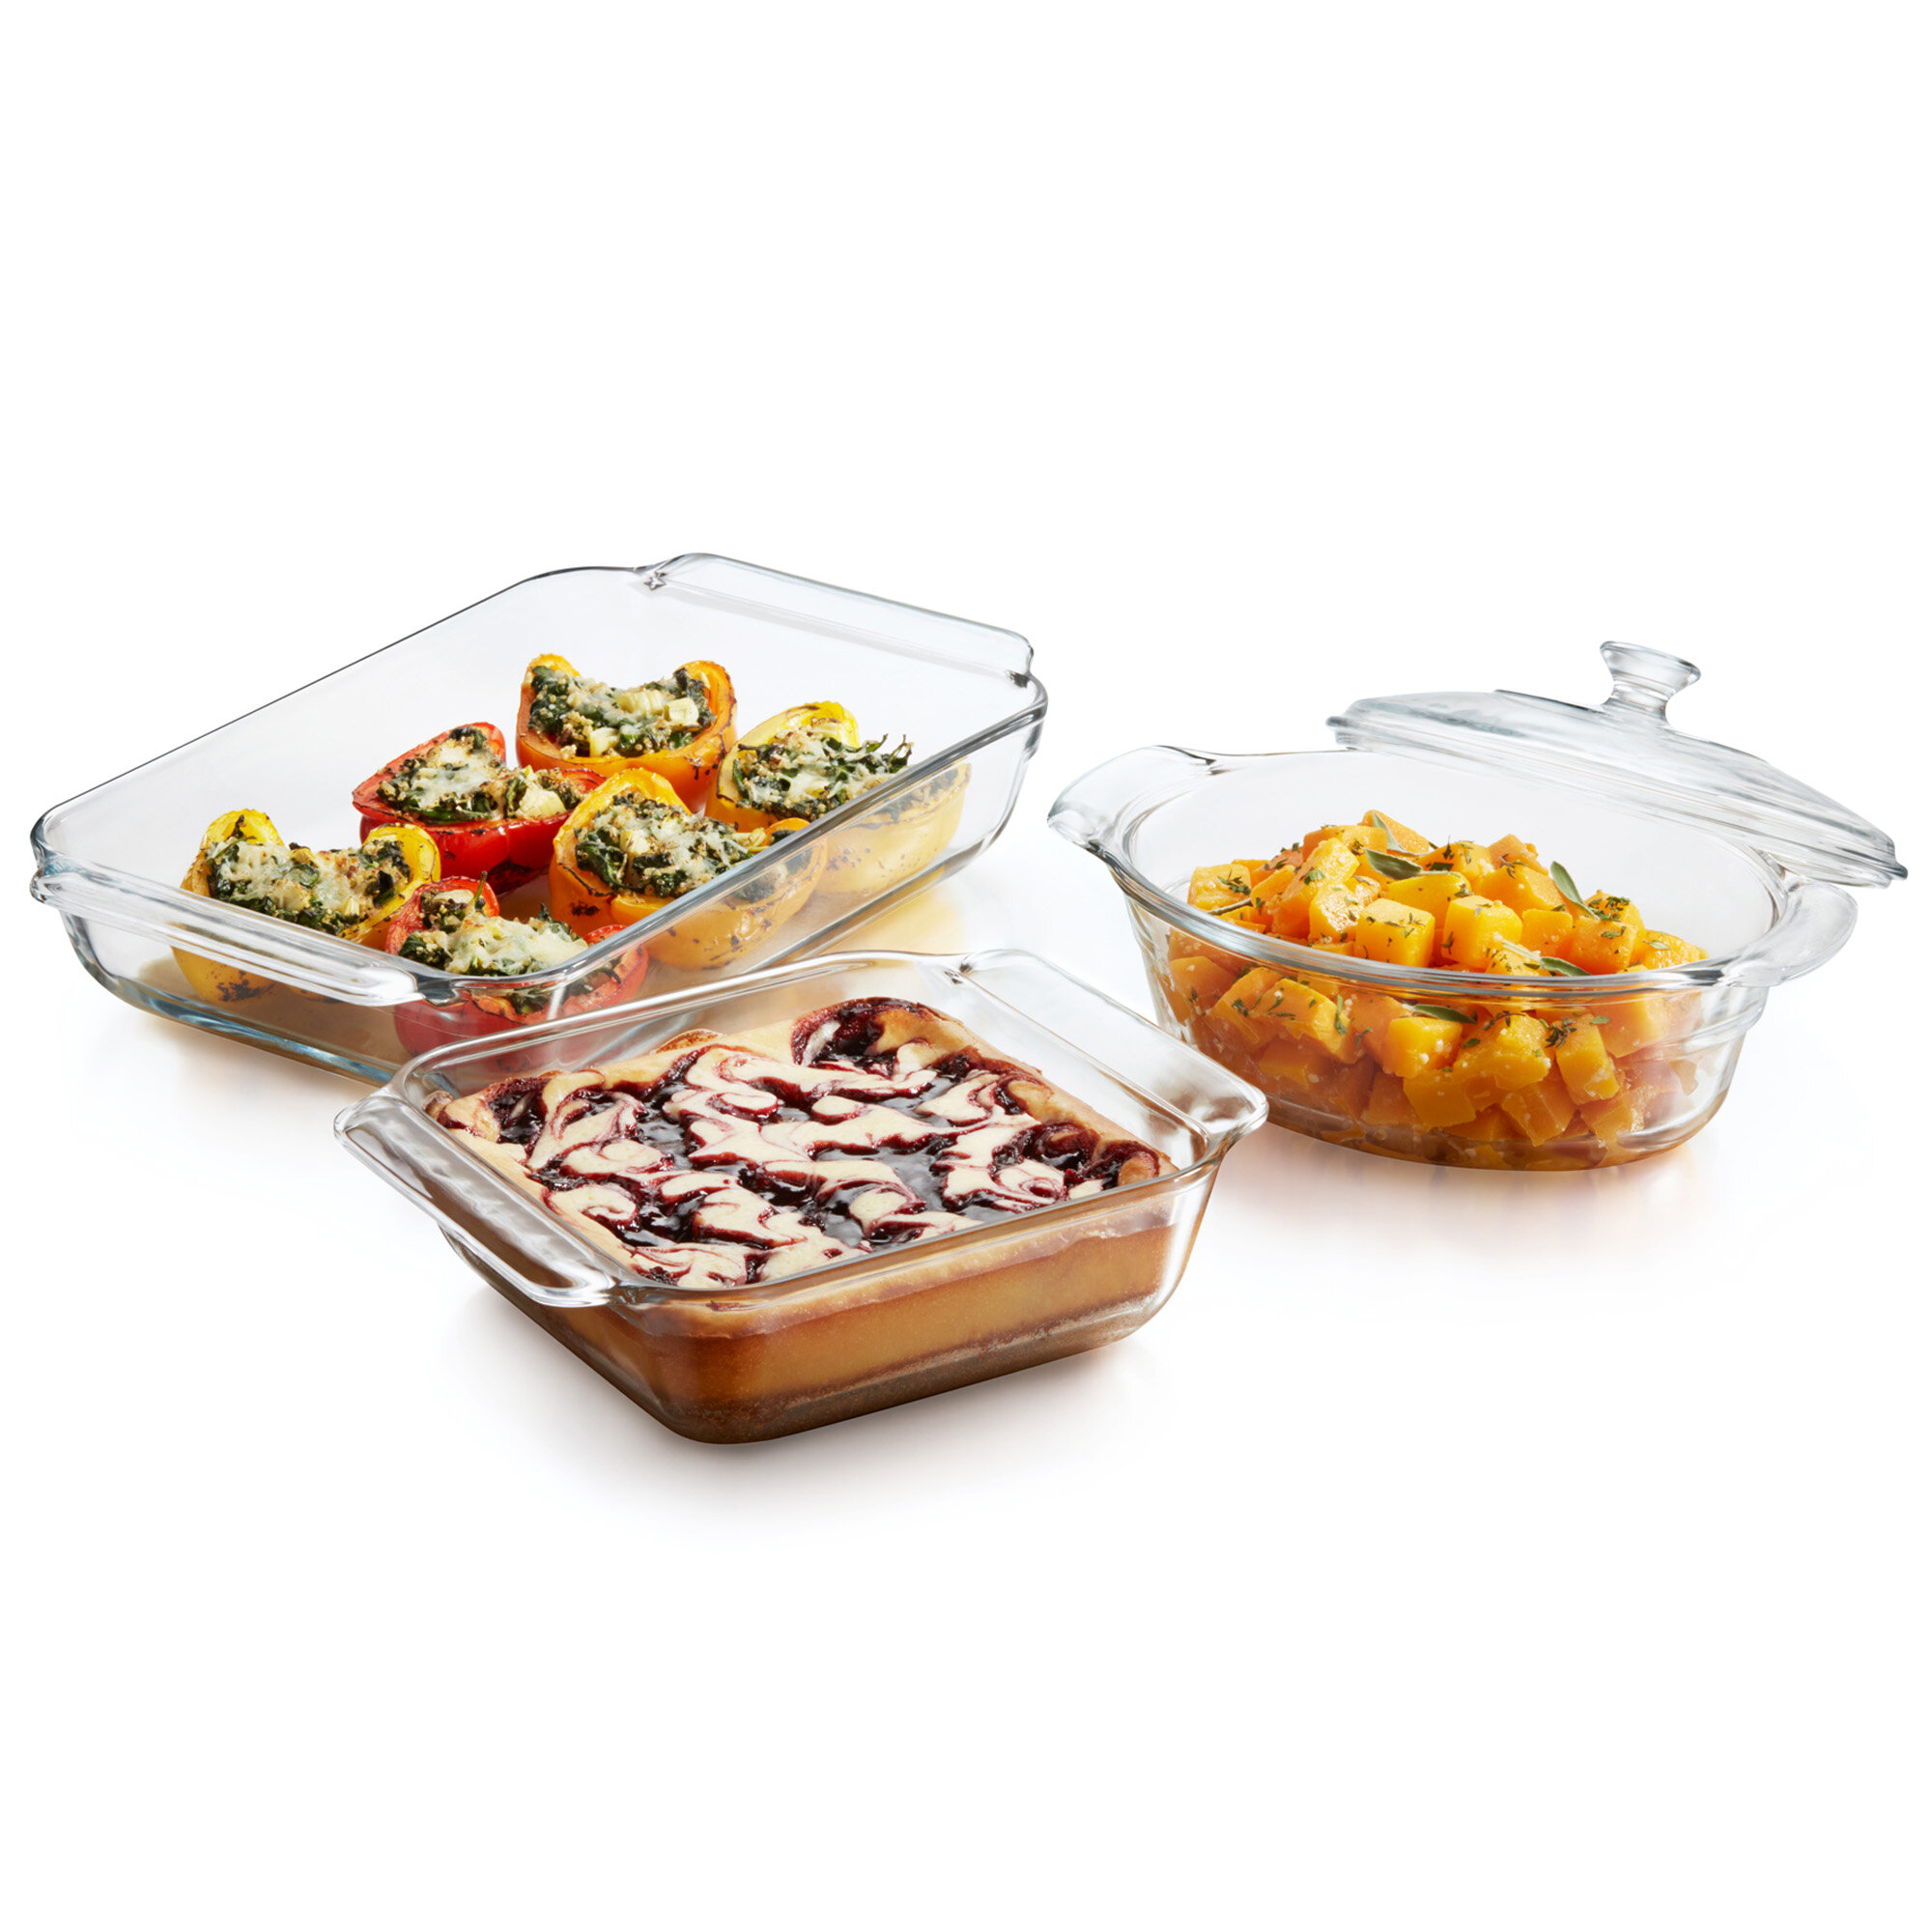 Libbey Bakers Basics 3-Piece Glass Casserole Baking Dish Set with Glass Covers